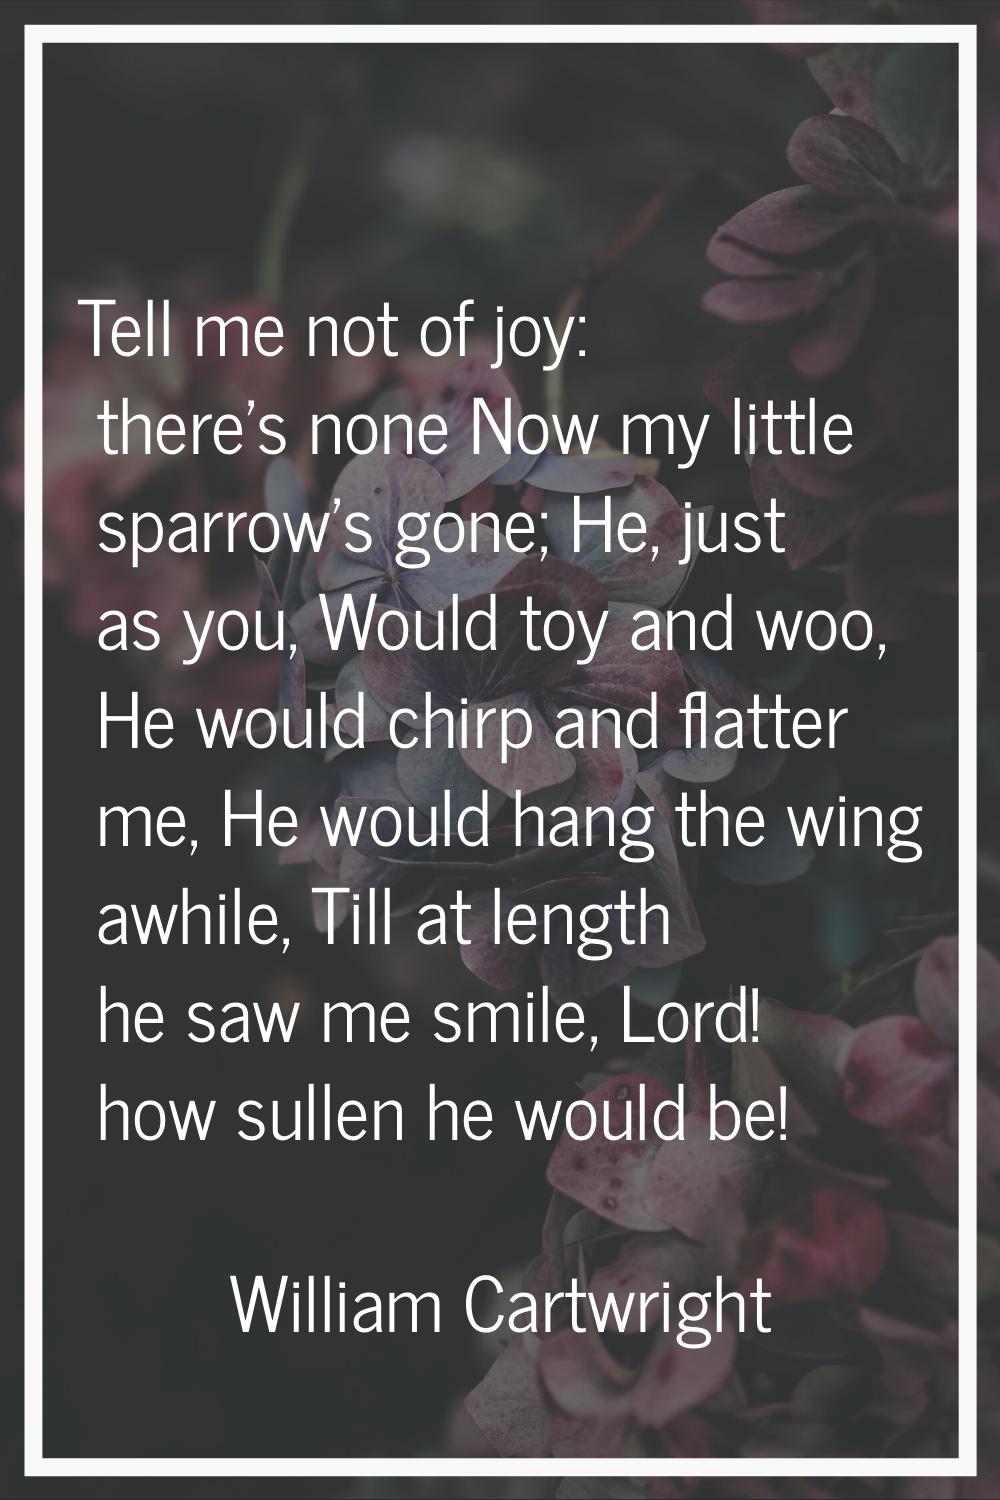 Tell me not of joy: there's none Now my little sparrow's gone; He, just as you, Would toy and woo, 